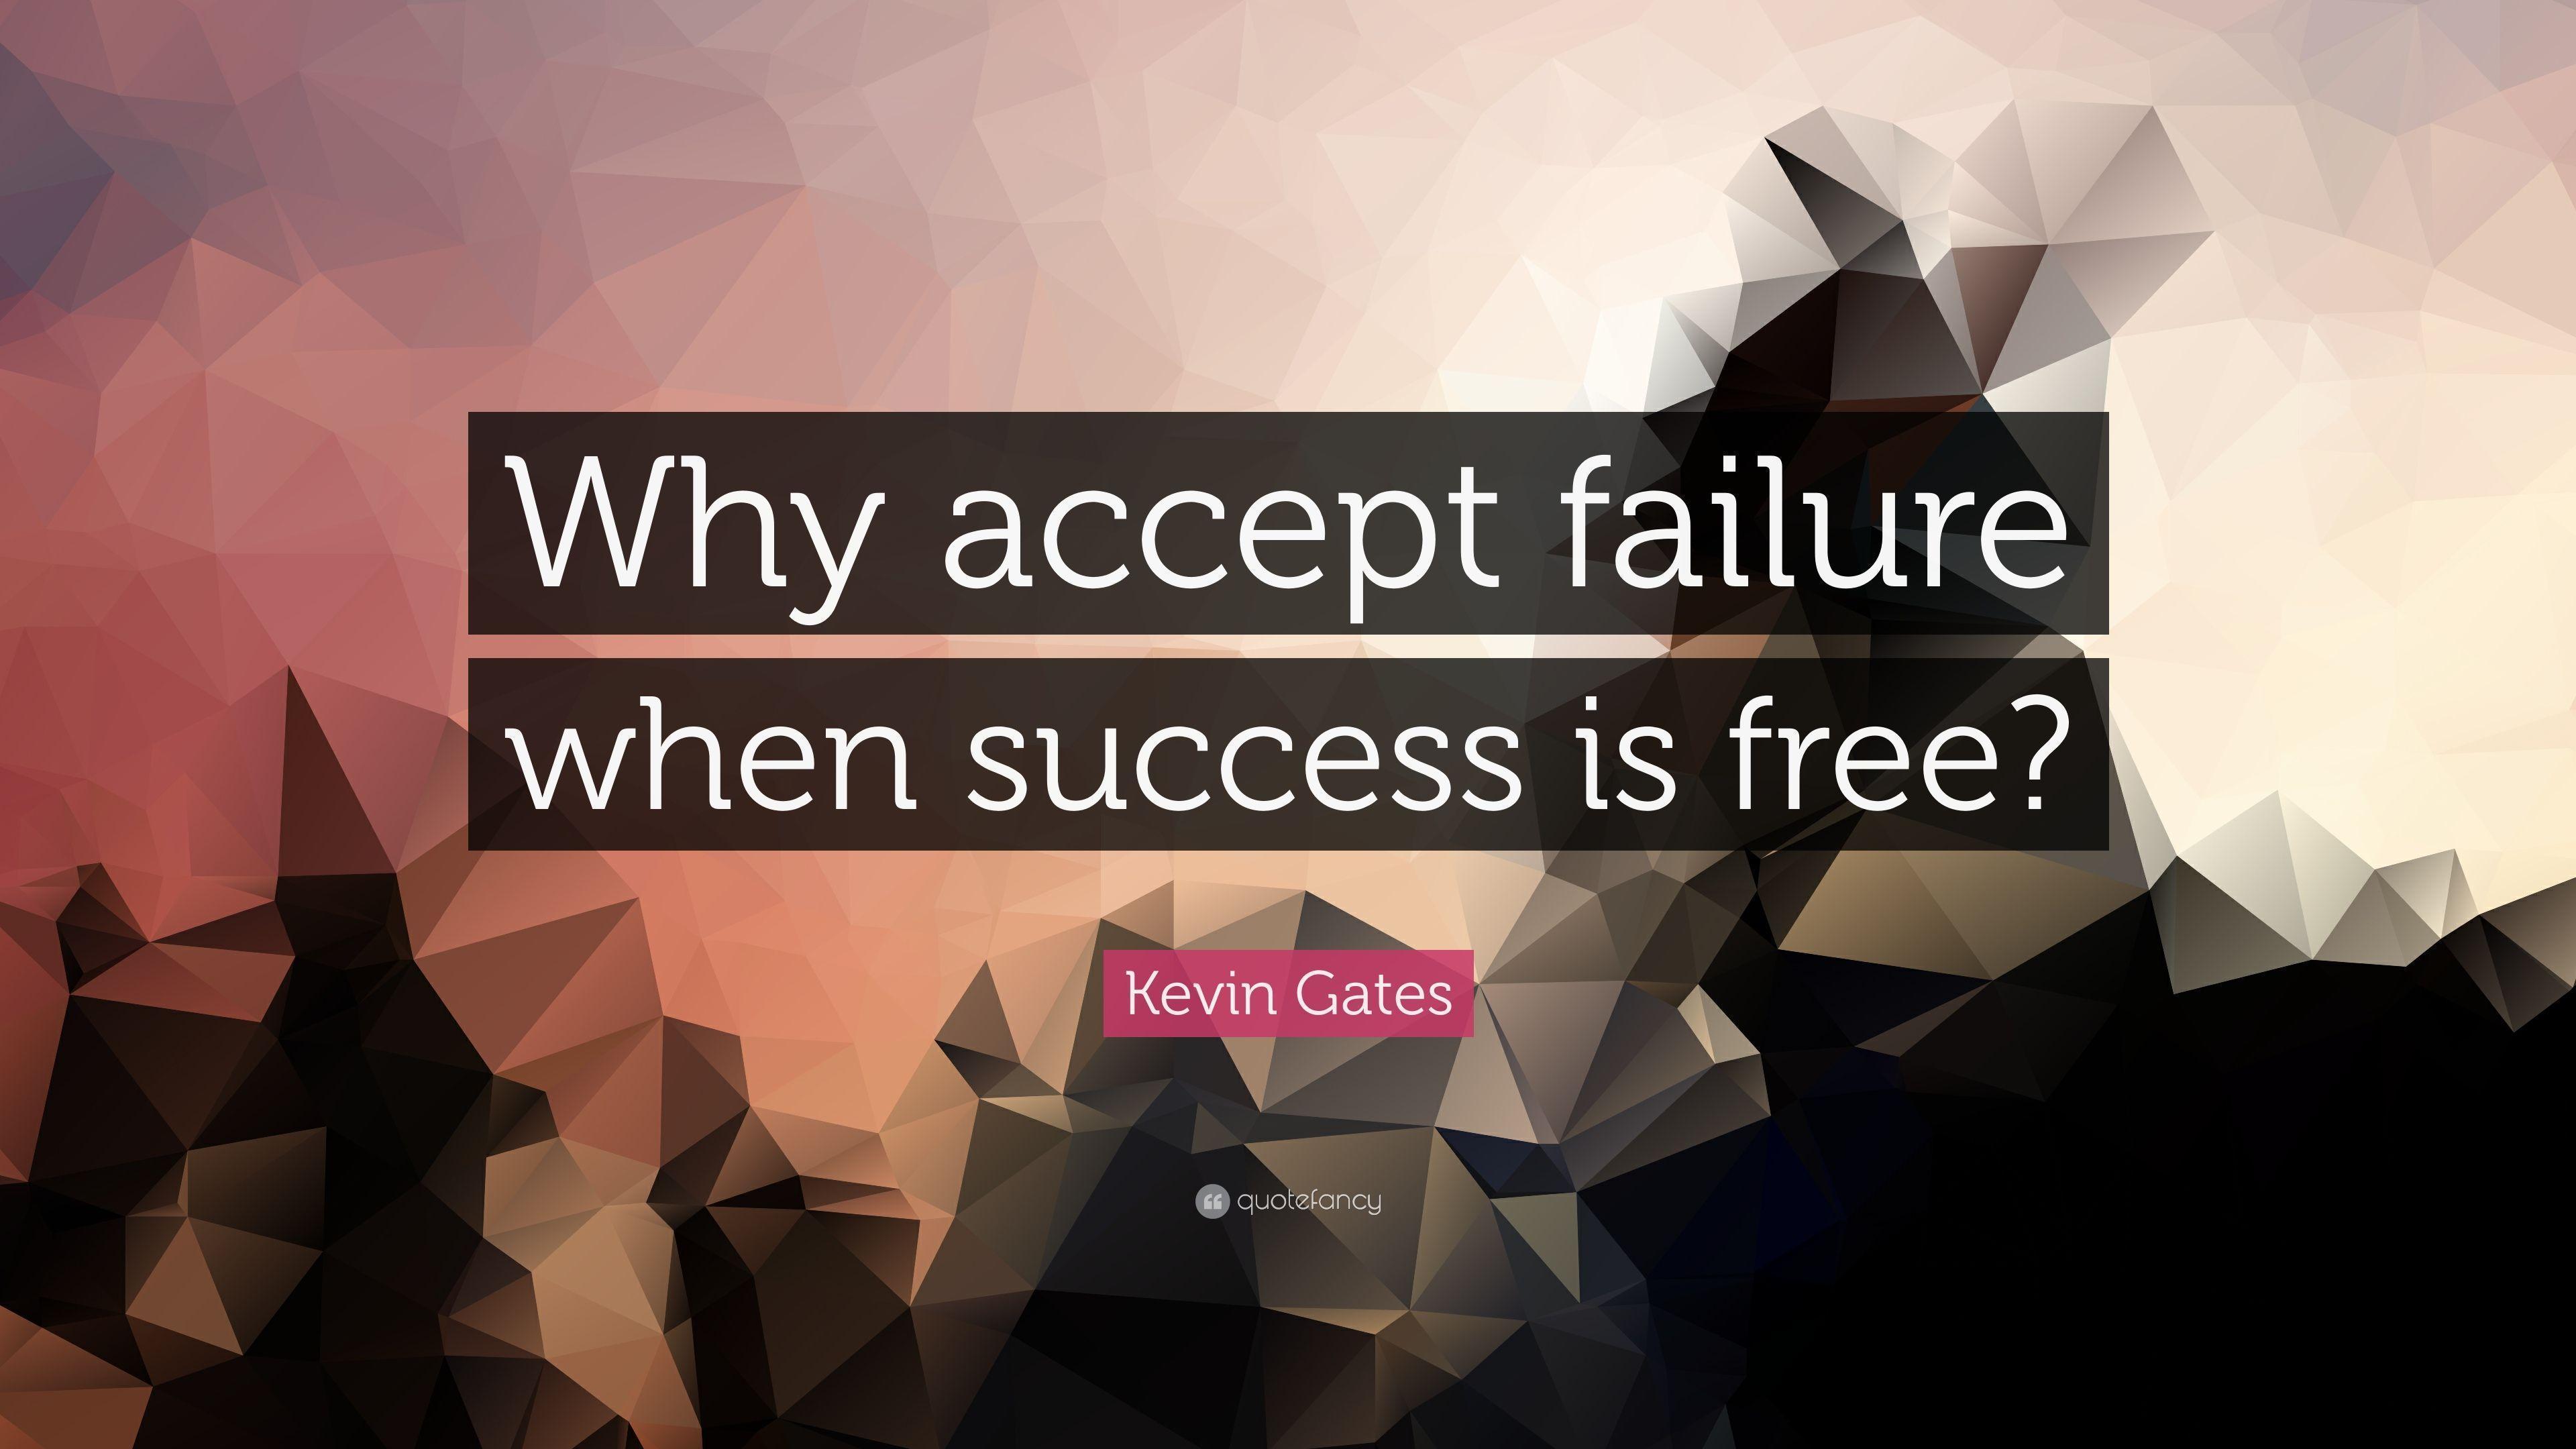 Kevin Gates Quote: “Why accept failure when success is free?” 13